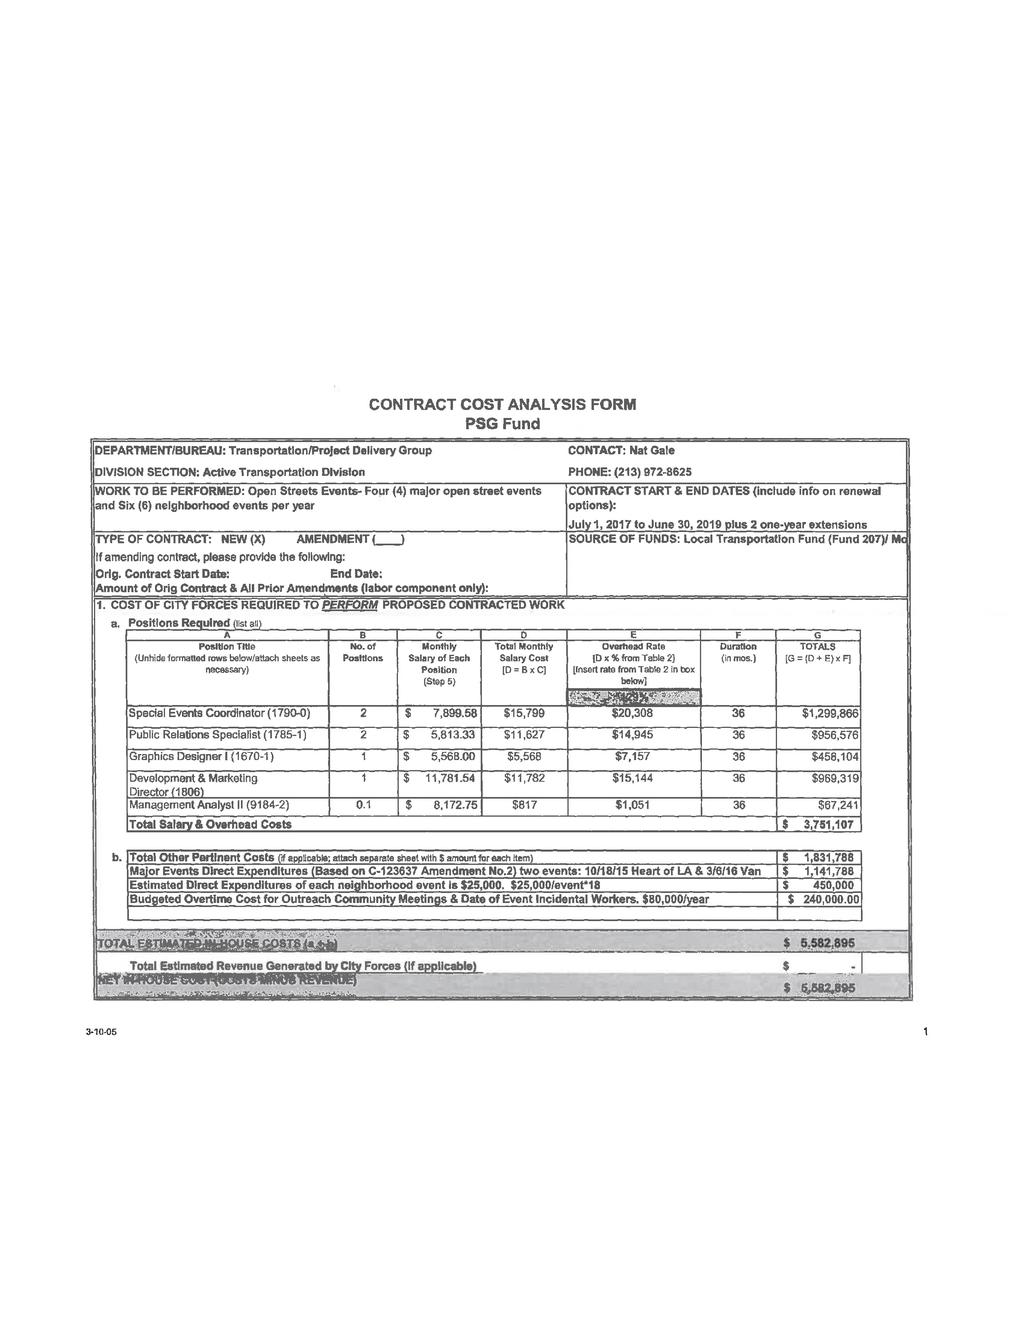 CONTRACT COST ANALYSIS FORM PSG Fund DEPARTMENT/BUREAU: Transportation/Project Deli very Group CONTACT: Nat Gale DIVISION SECTION: Active Transportation Division WORK TO BE PERFORMED: Open Streets